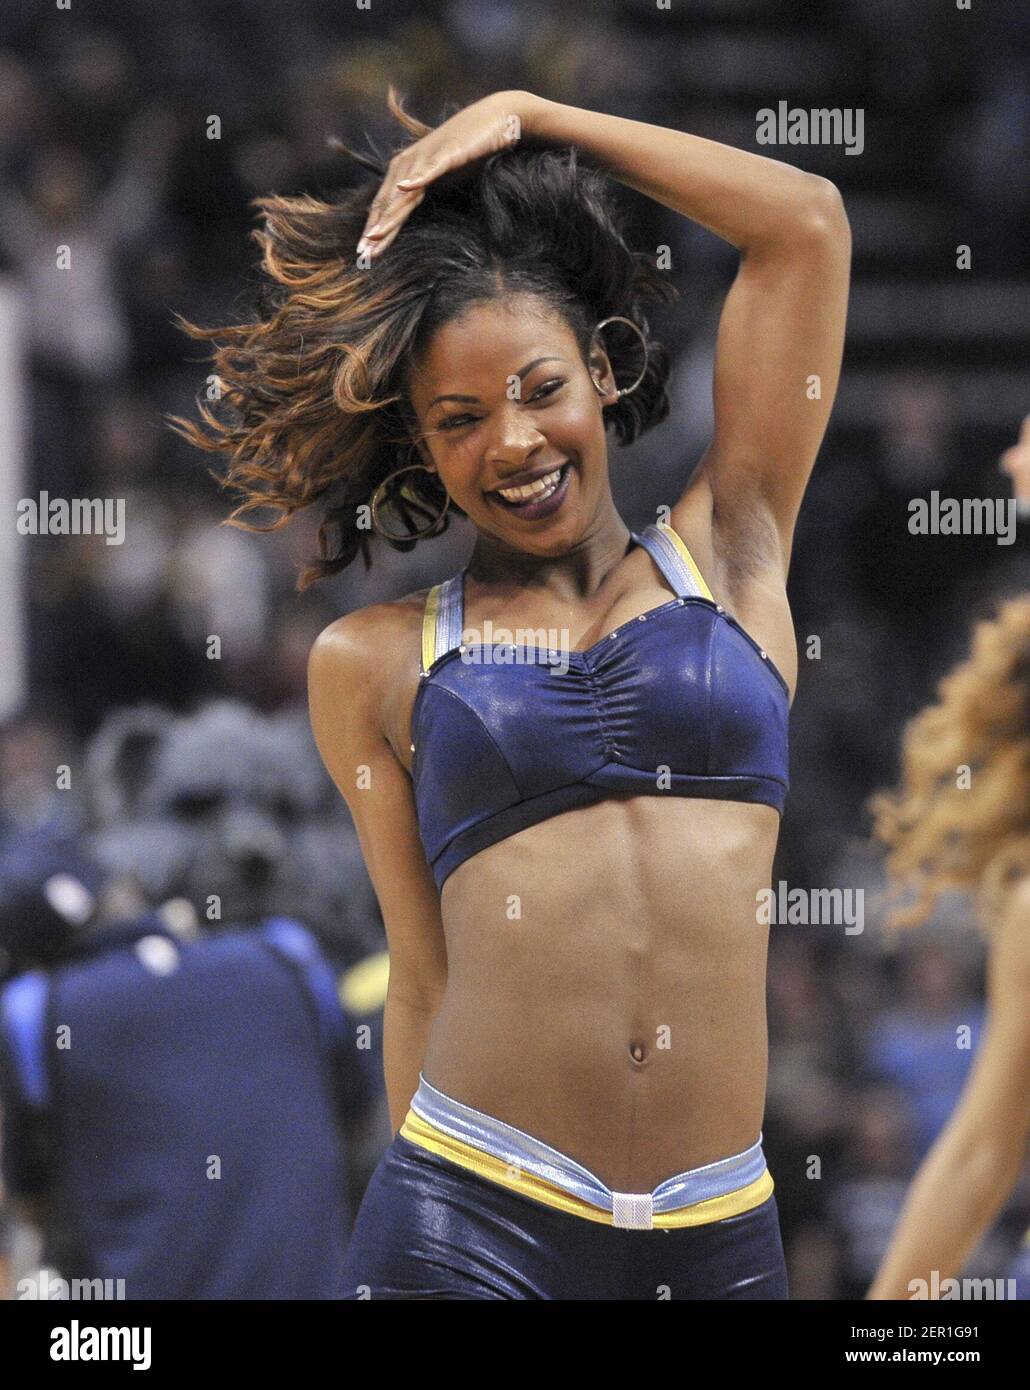 Mar 12, 2018; Memphis, TN, USA; Memphis Grizzlies dancer performs during  the second half against the